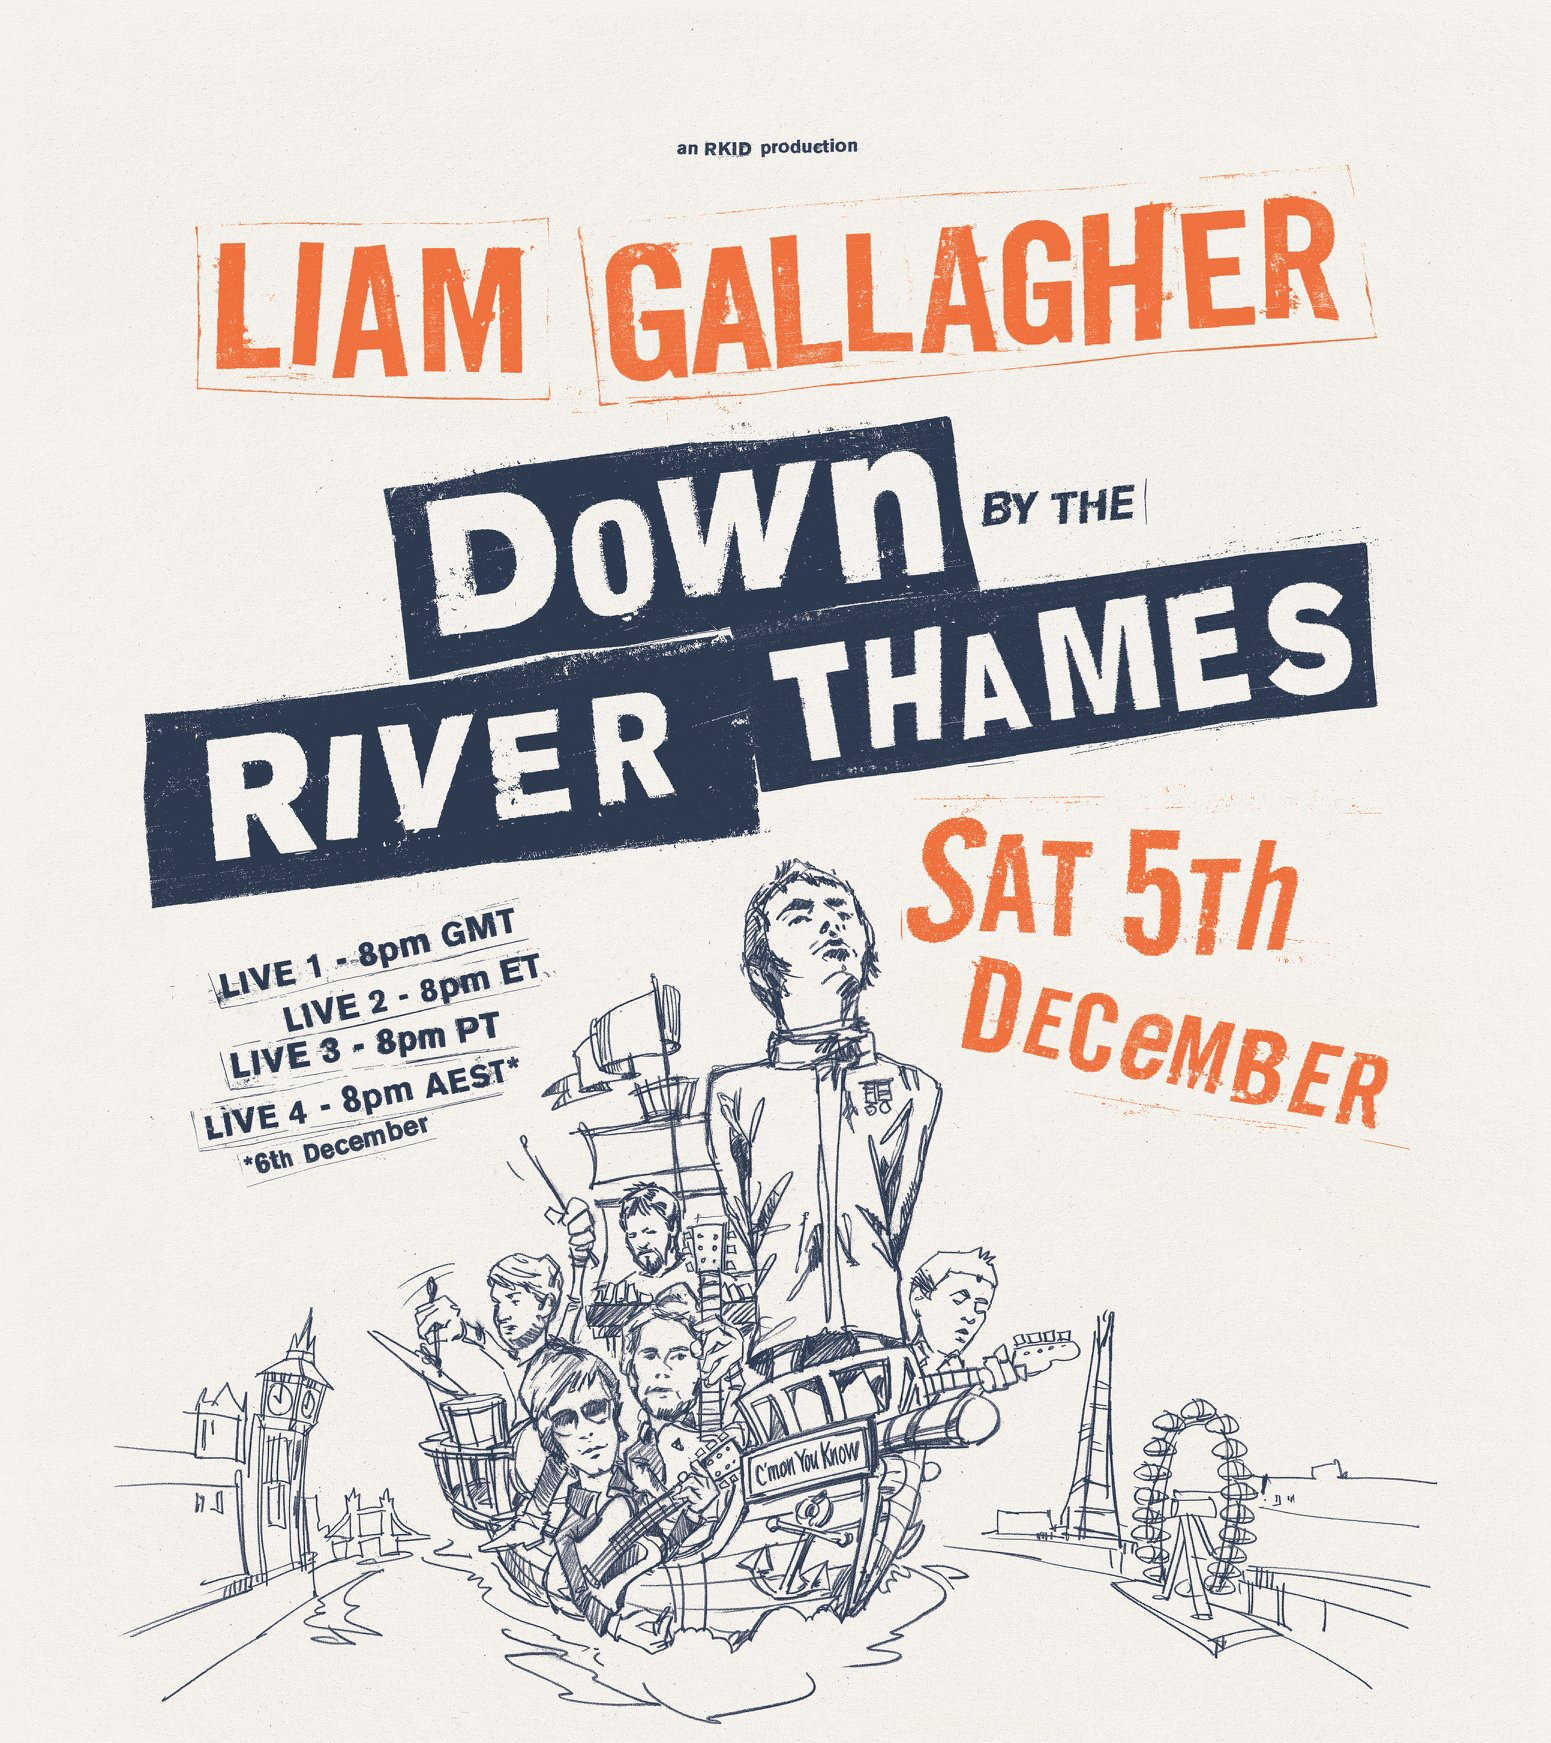 LIAM GALLAGHER announces exclusive live stream gig ‘Down By The River Thames’ on Saturday, December 5th 